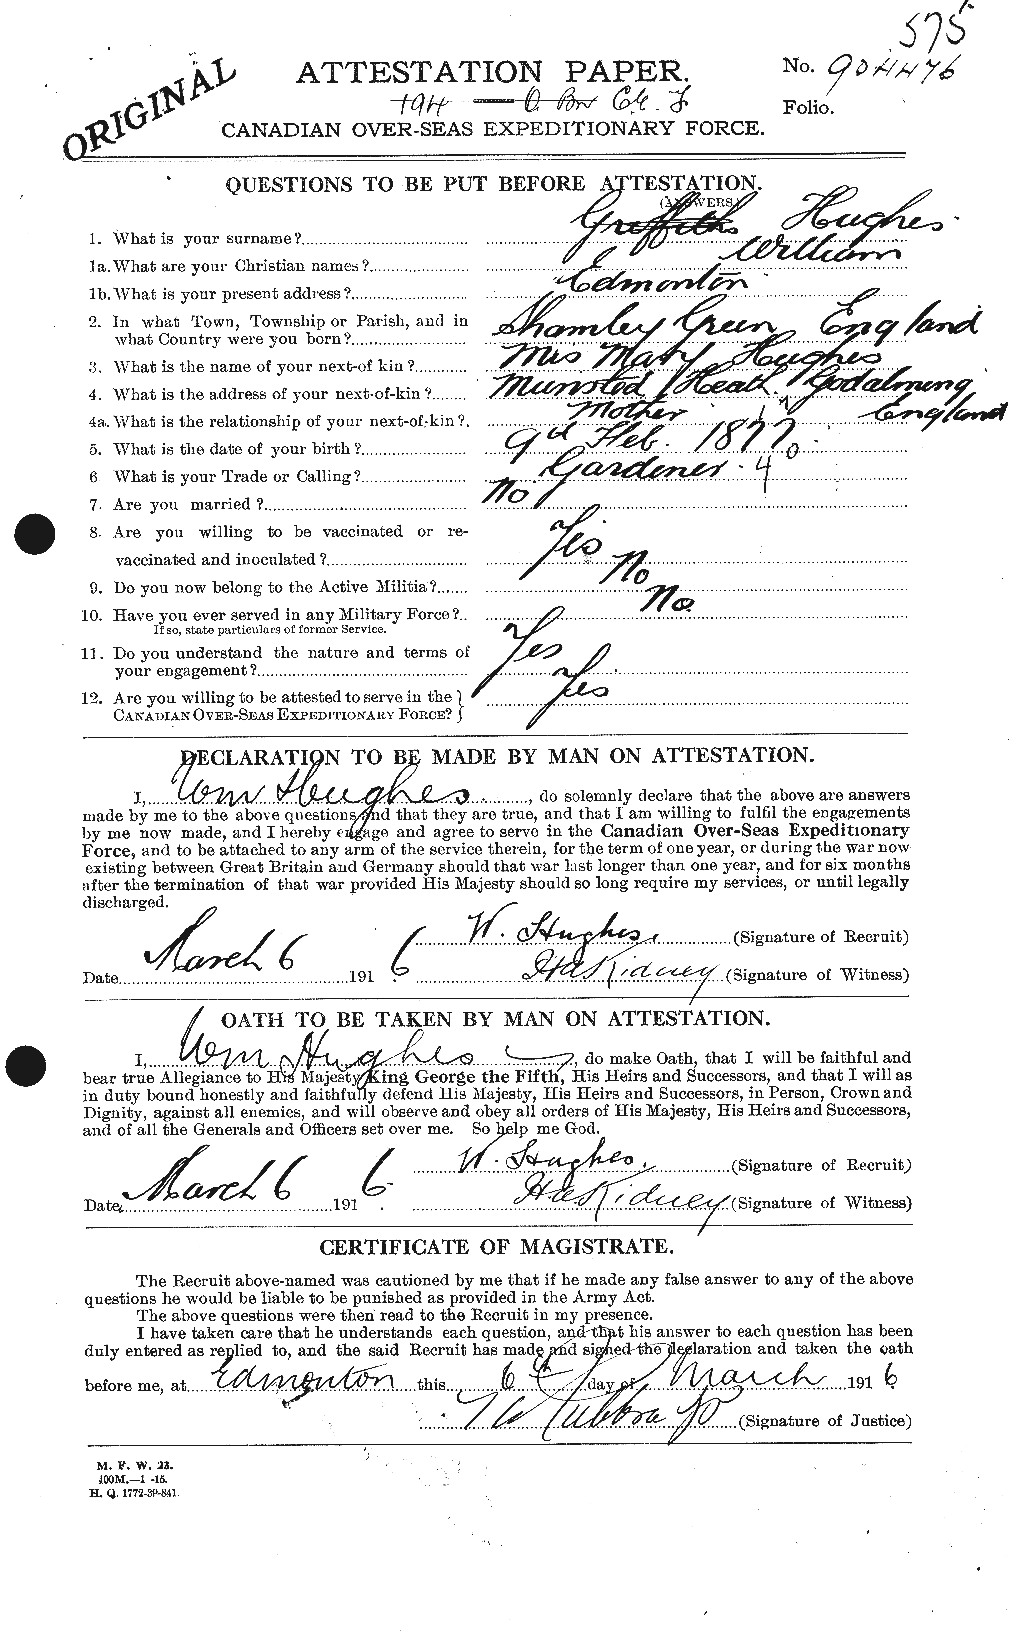 Personnel Records of the First World War - CEF 405886a